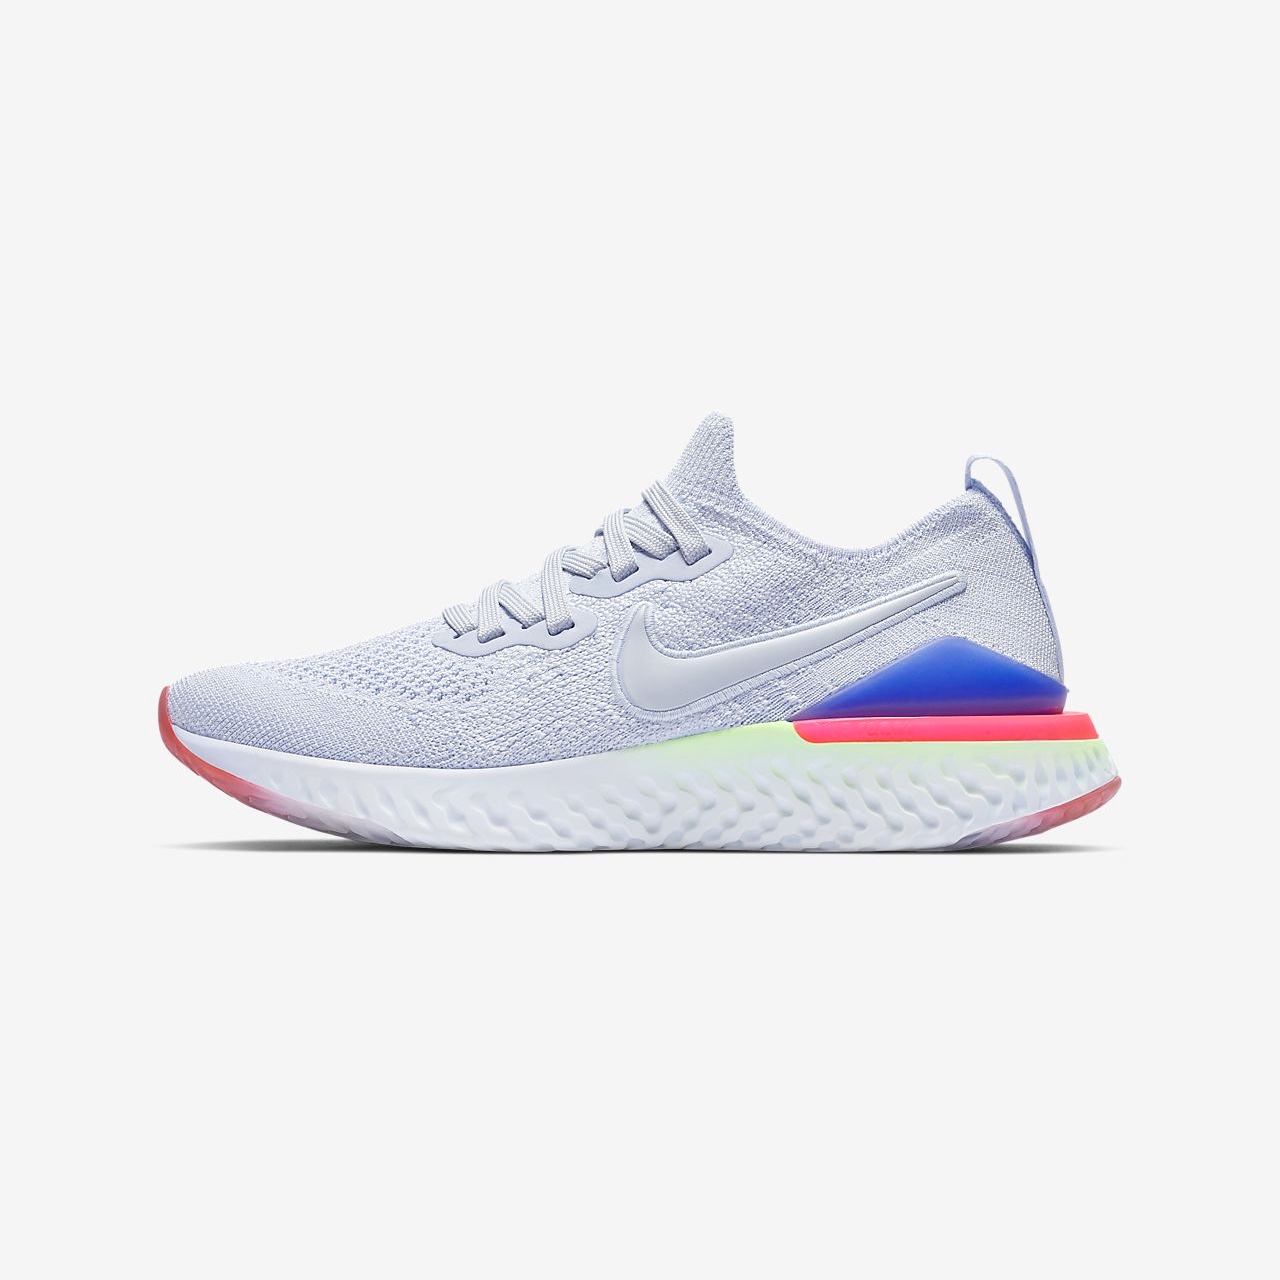 Epic react product